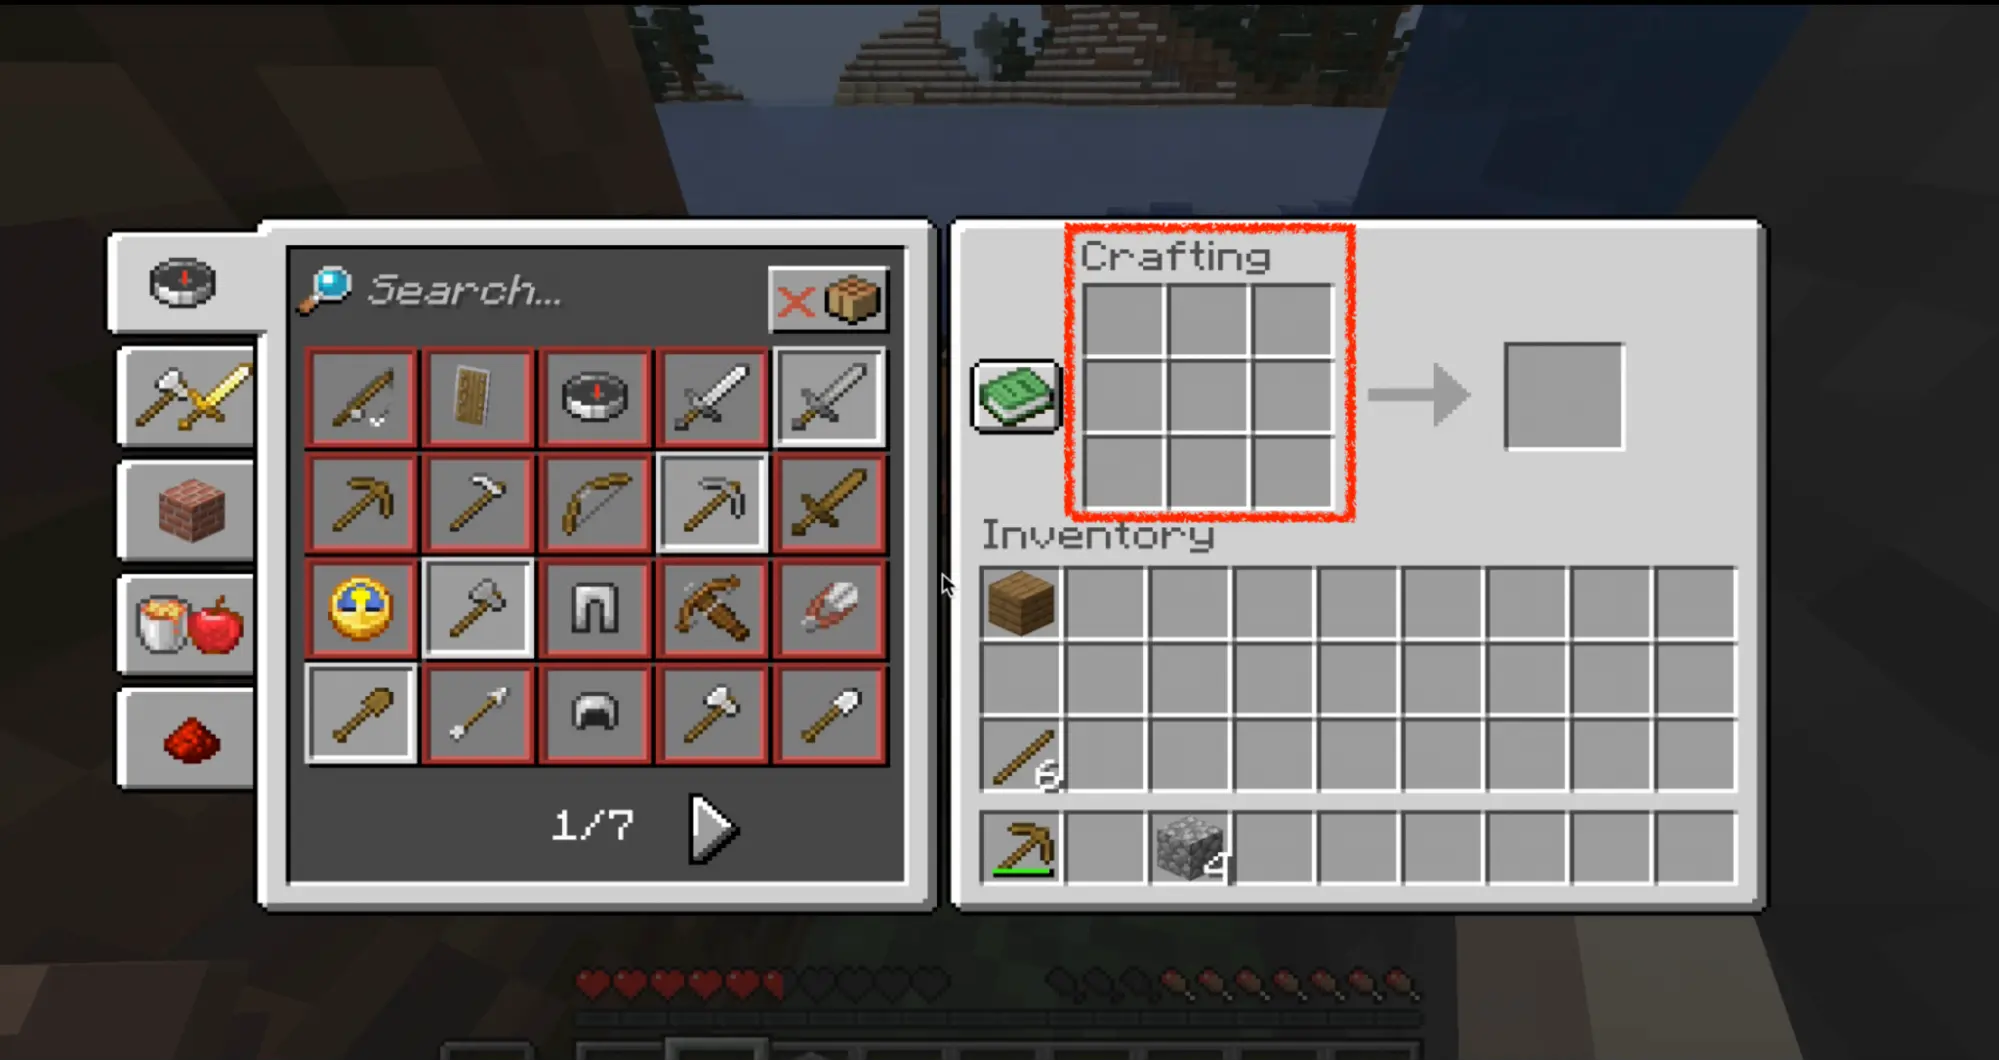 step 2 open the crafting menu